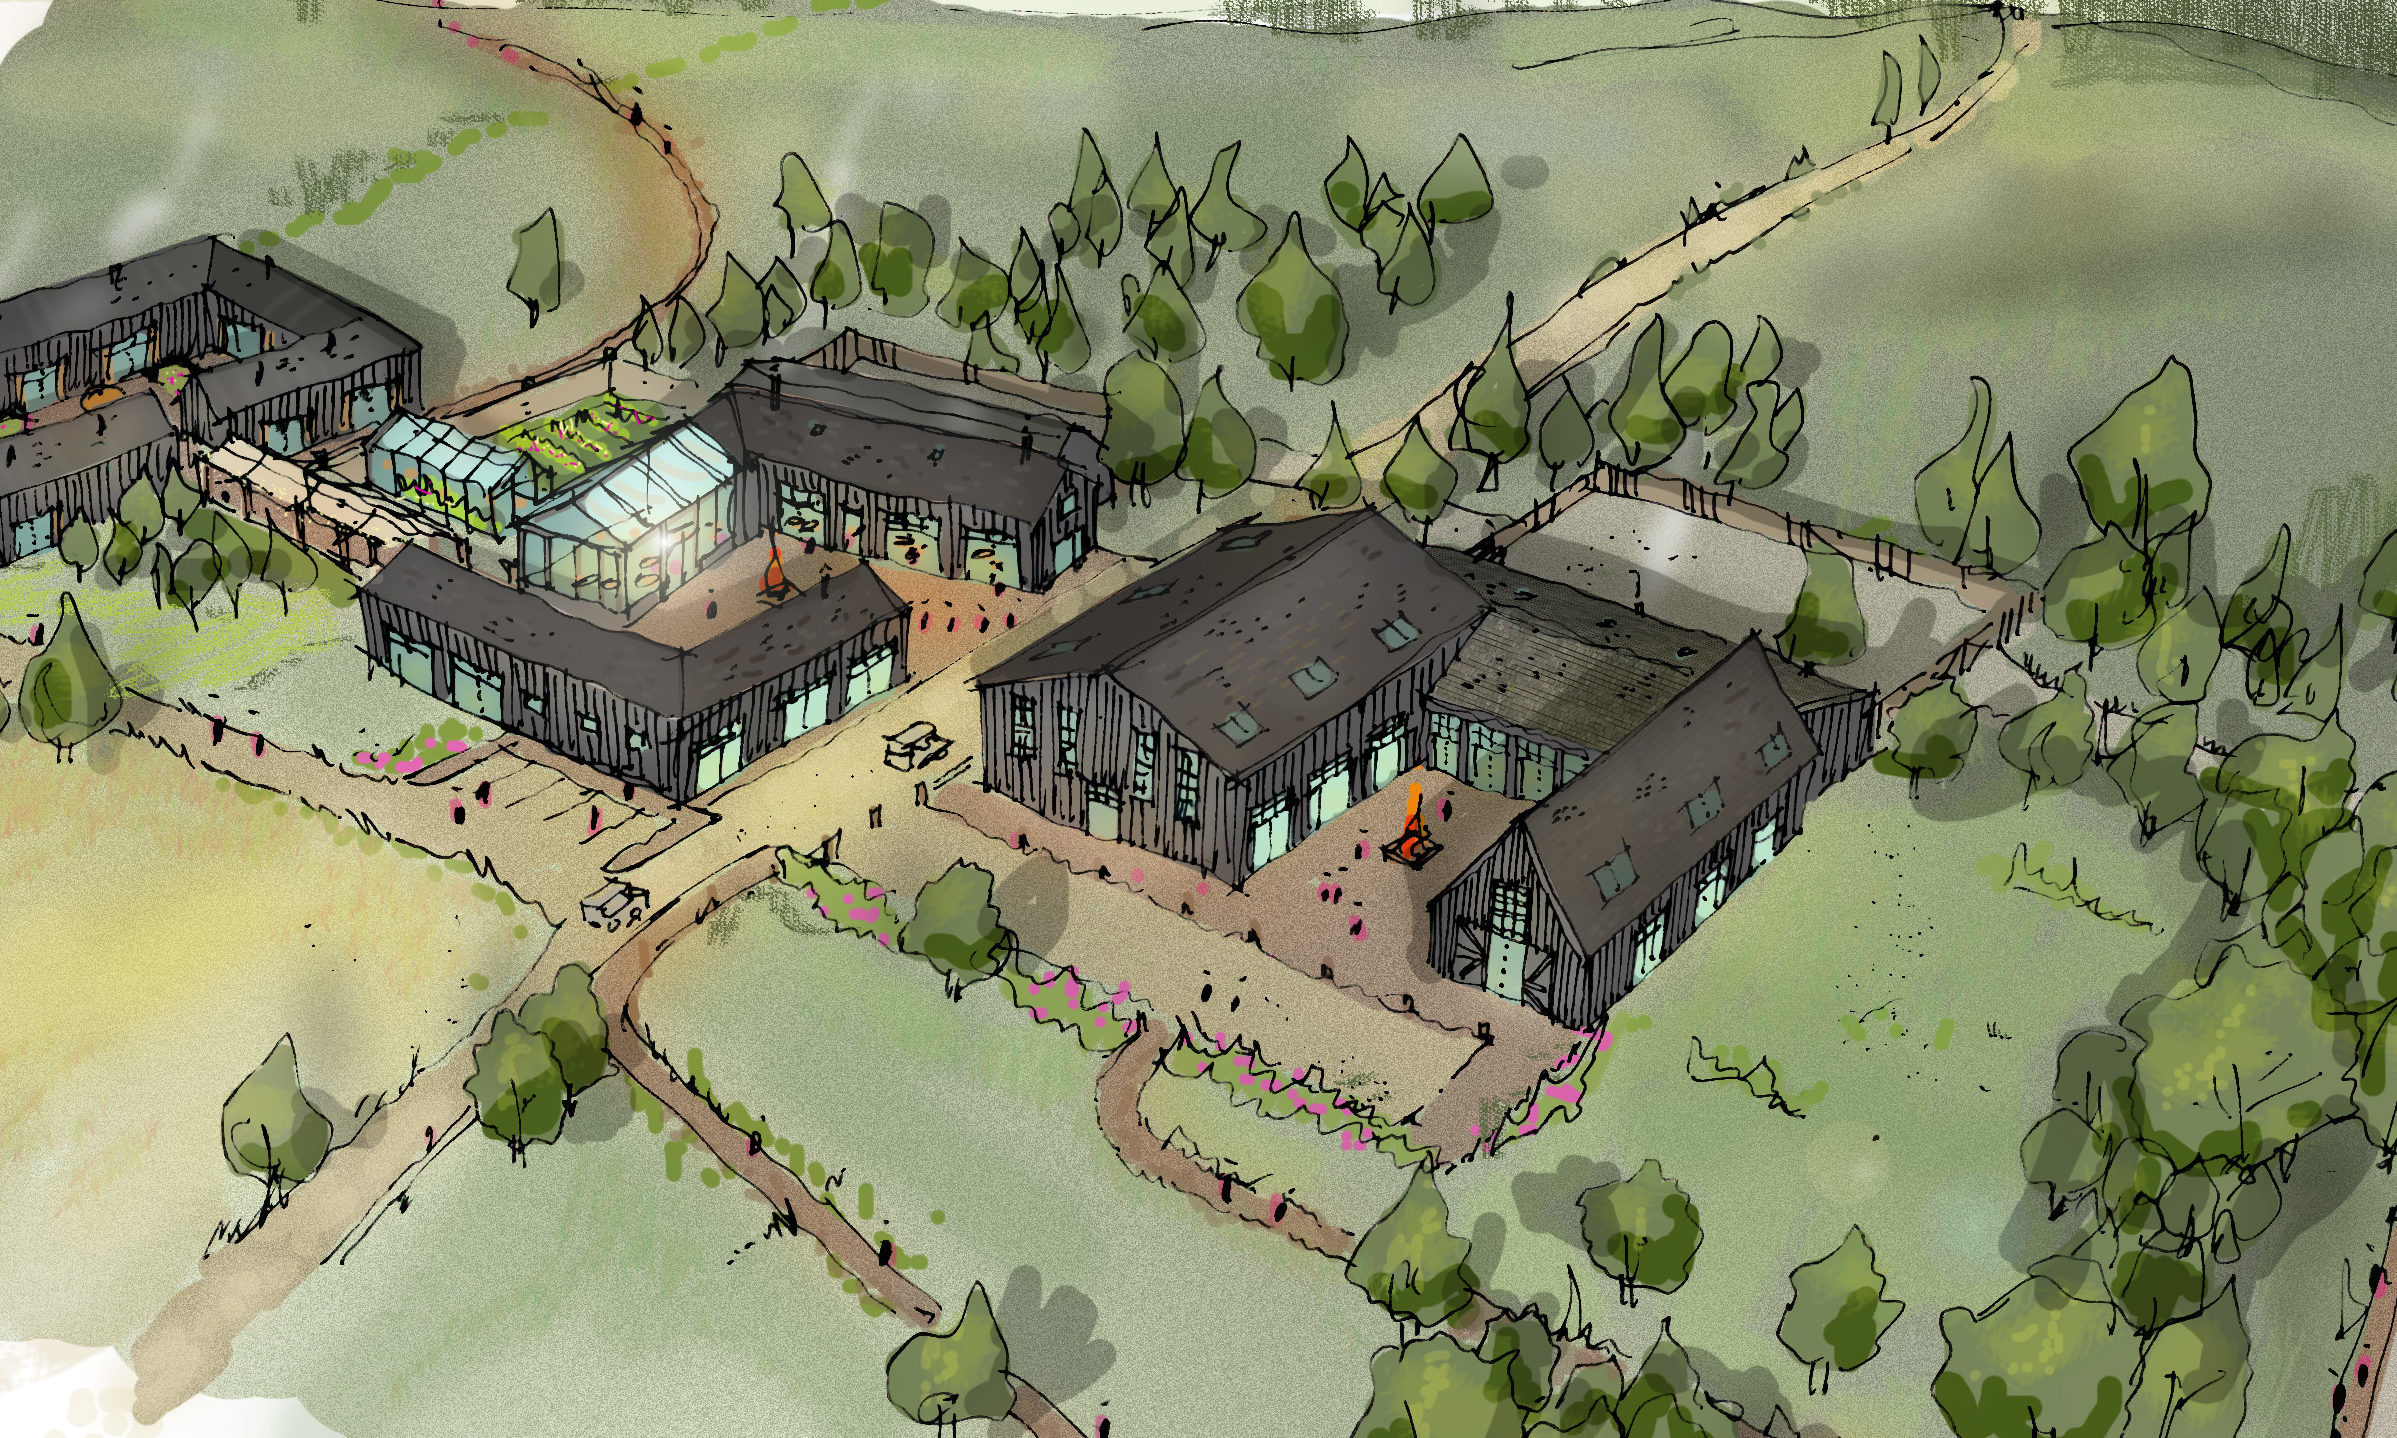 An artist impression of how plans for the Easterton Farm site could look